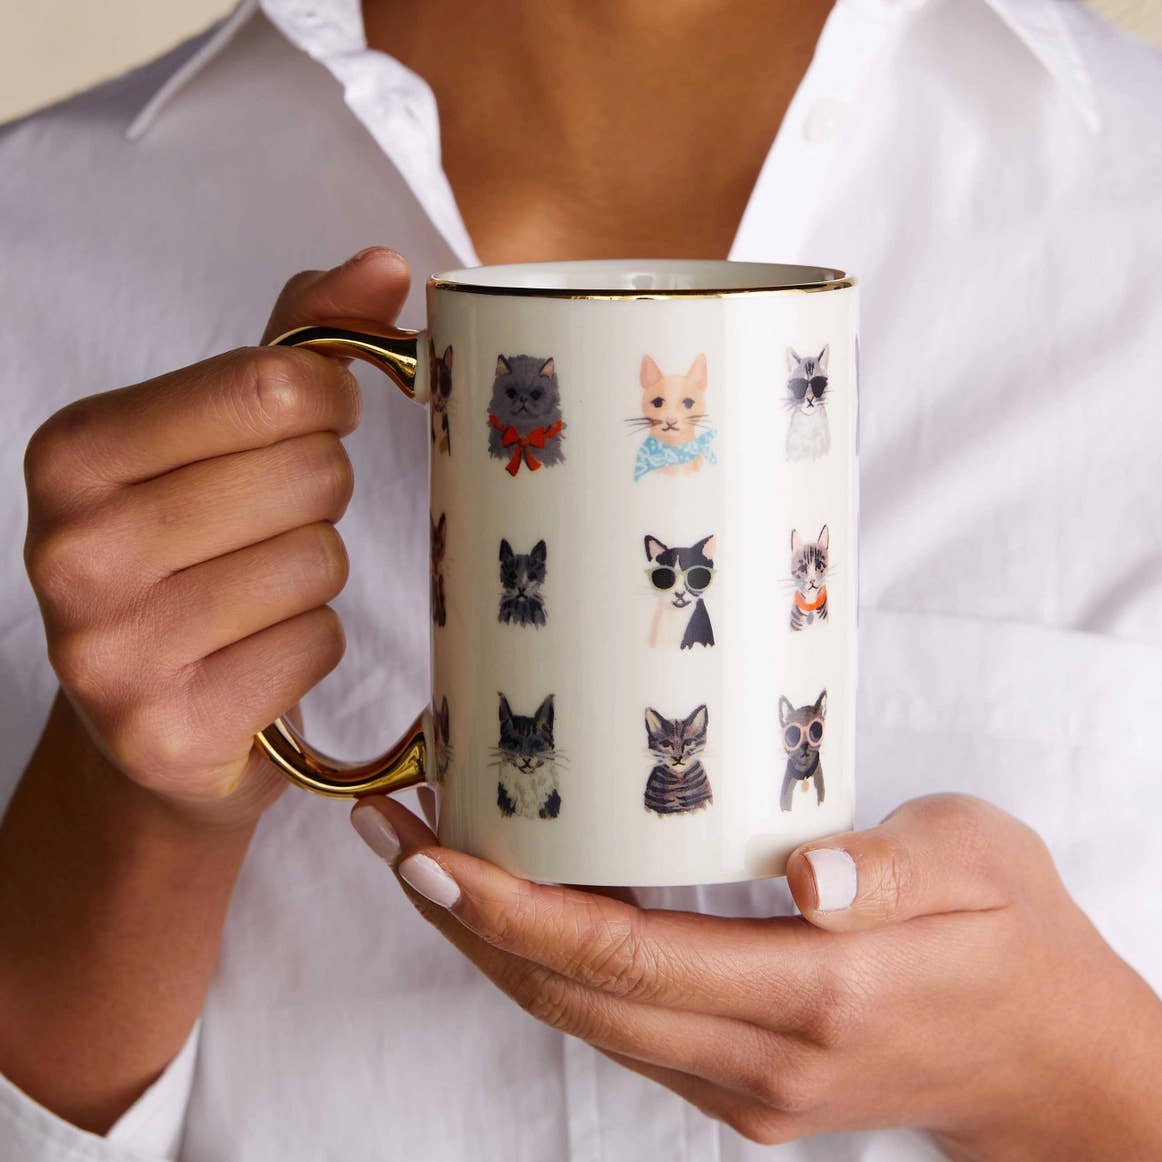 Person wearing a white button down shirt holding the Cats Porcelain Mug